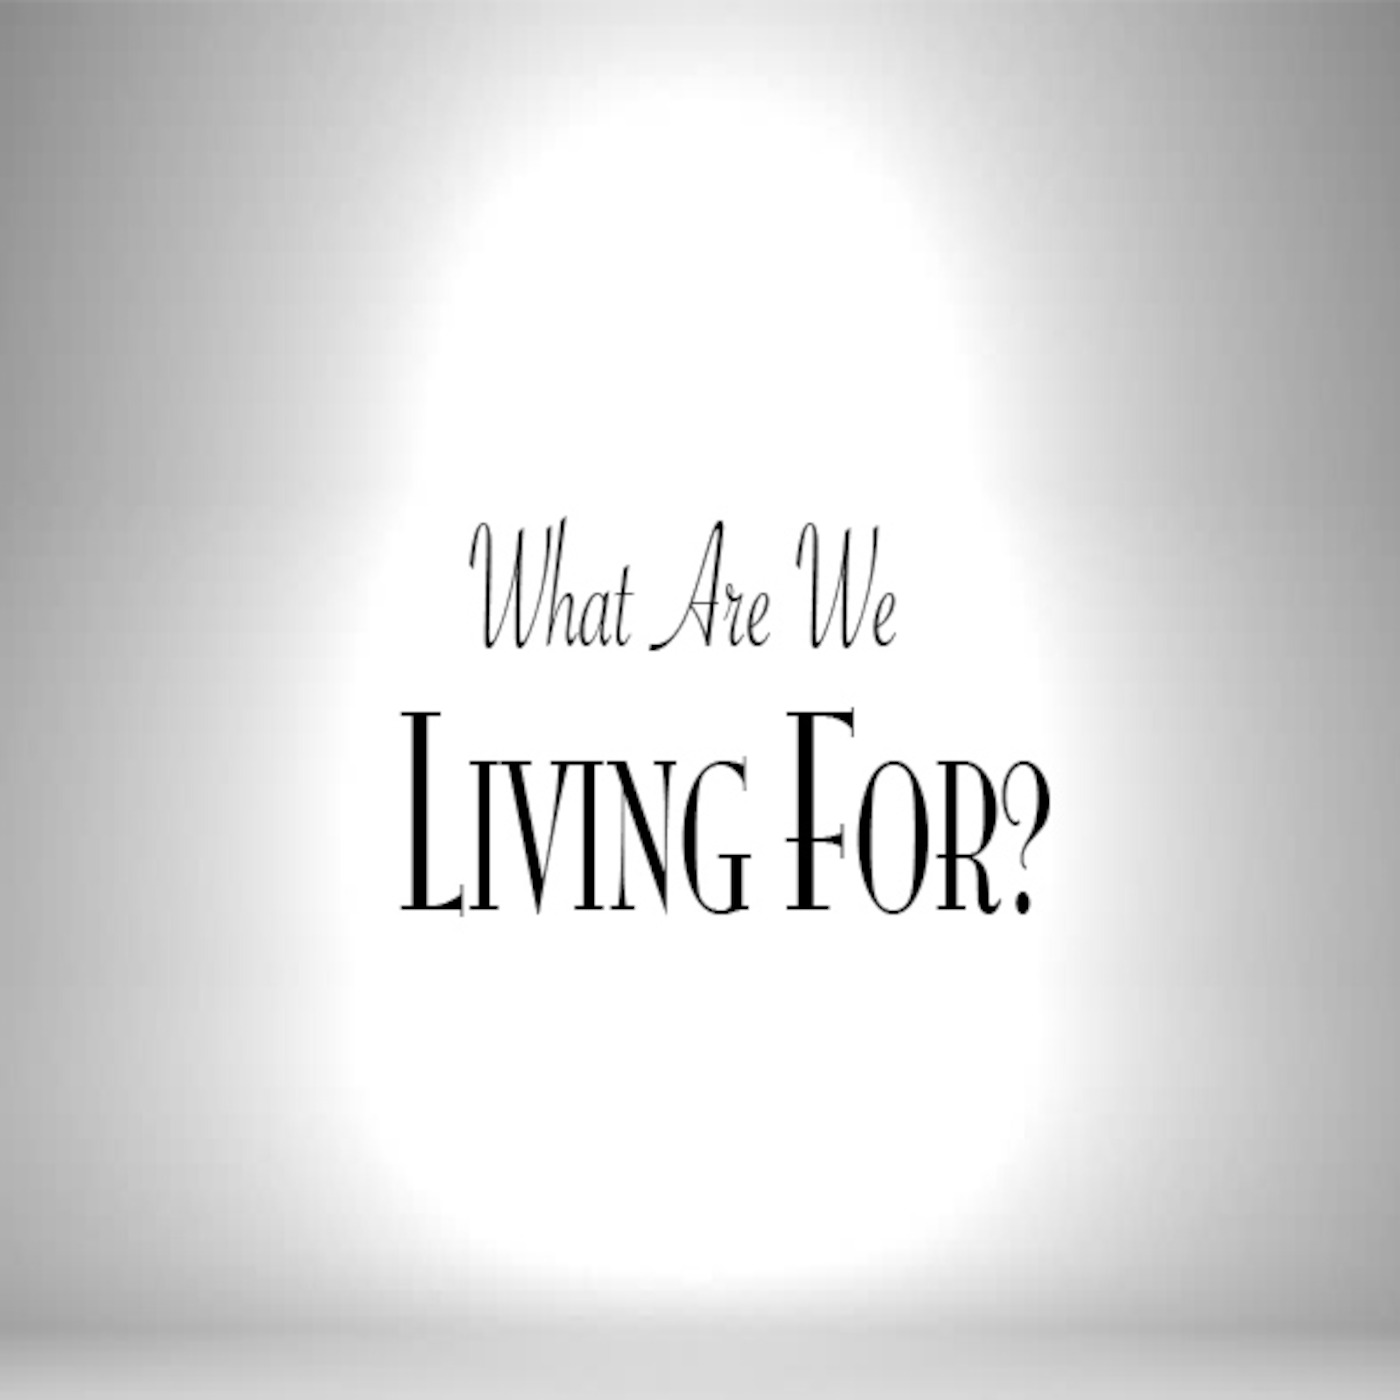 What Are We Living For?